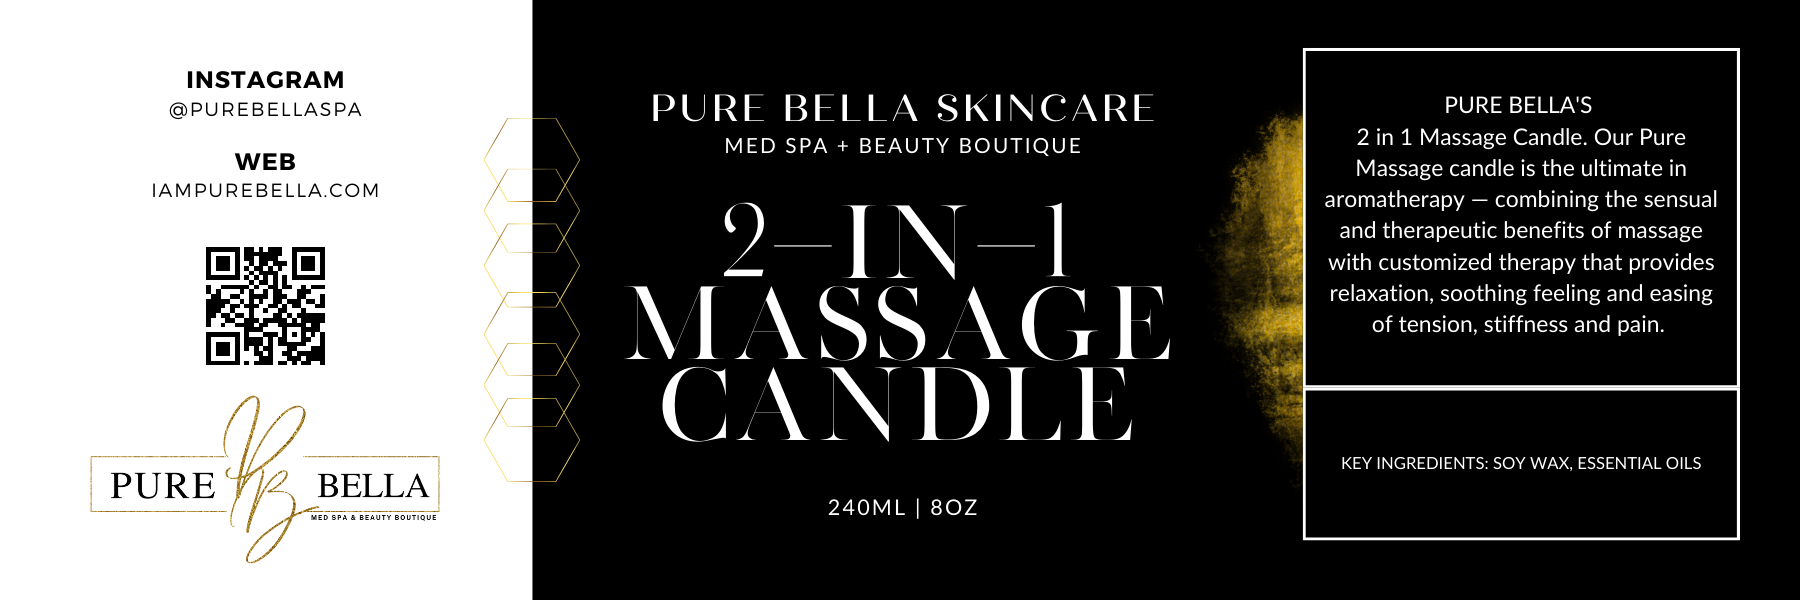 Pure Bella 2 in 1 Massage Candle